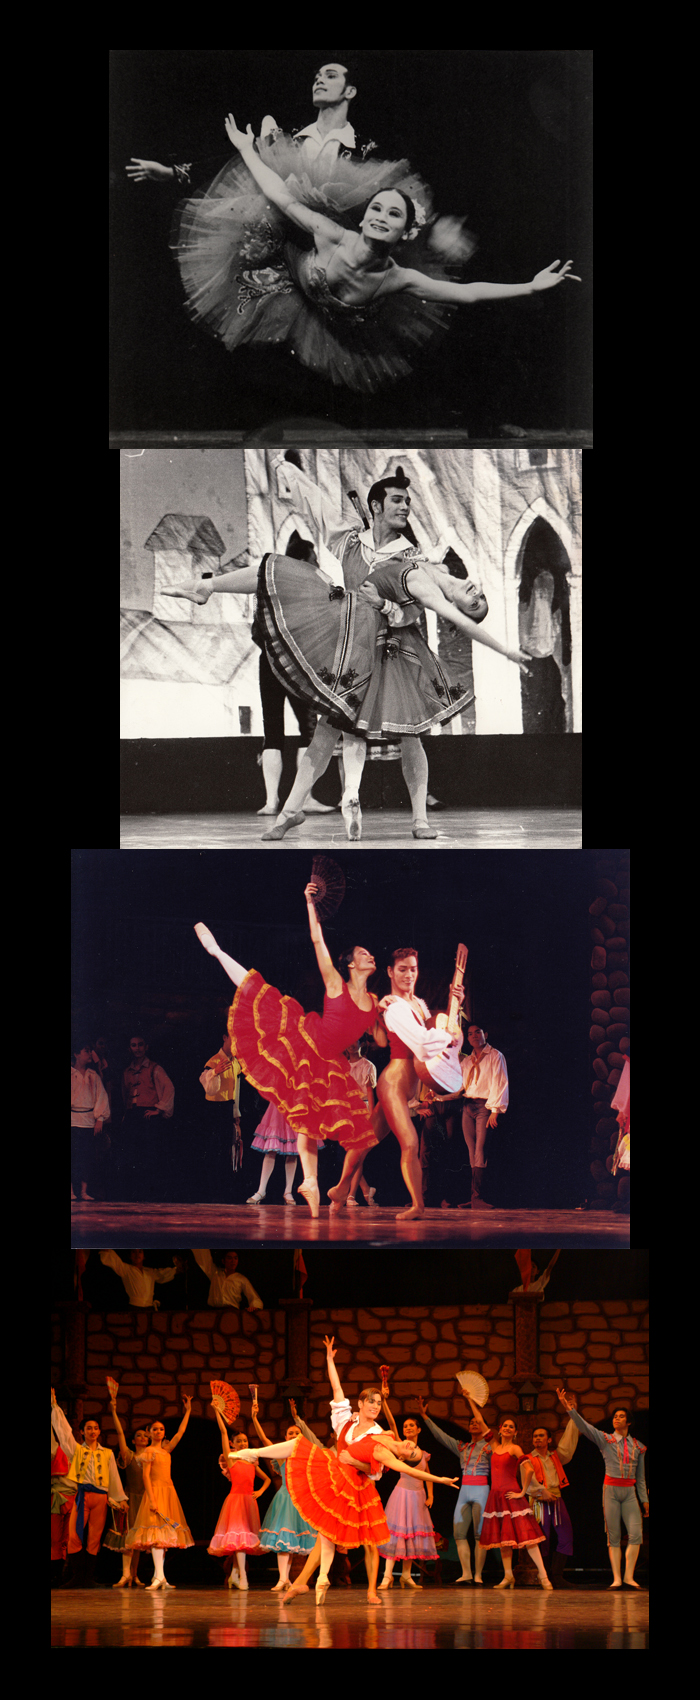 Dancing the same roles repeatedly allows the dancers to grow with the role and mature in their art. Osias Barroso and Lisa Macuja danced in Don Quixote many times, among them in (from top) in 1995, 1997, 1999 and 2004